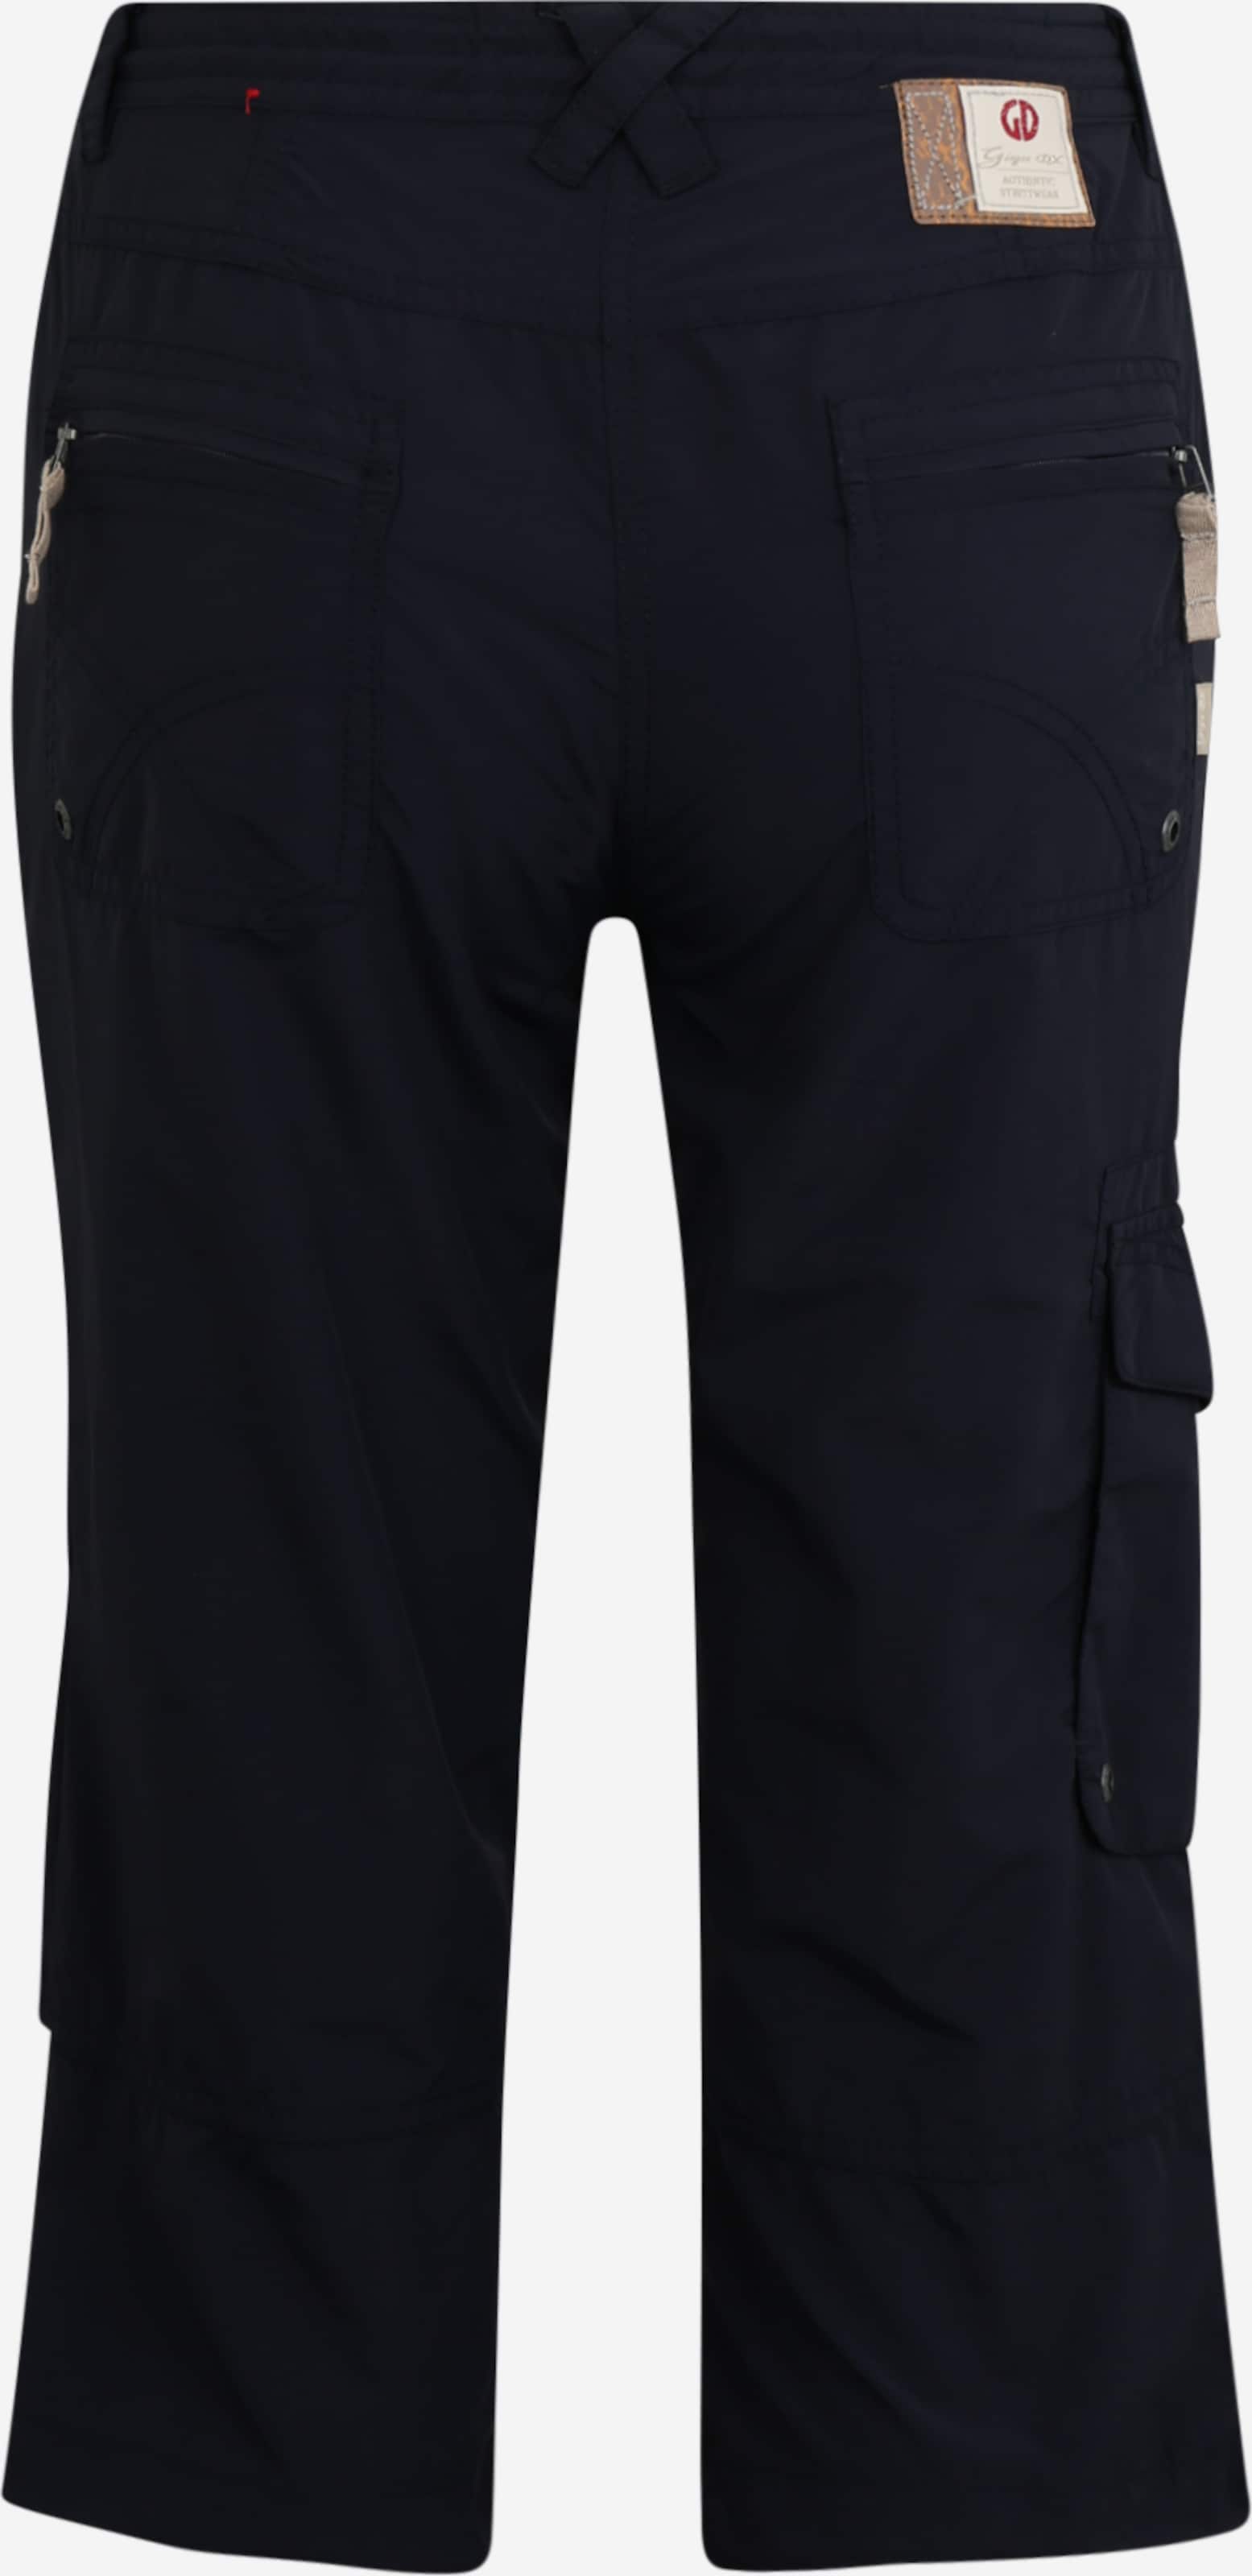 by killtec | in YOU Navy ABOUT G.I.G.A. \'Fenia\' Hose Regular DX